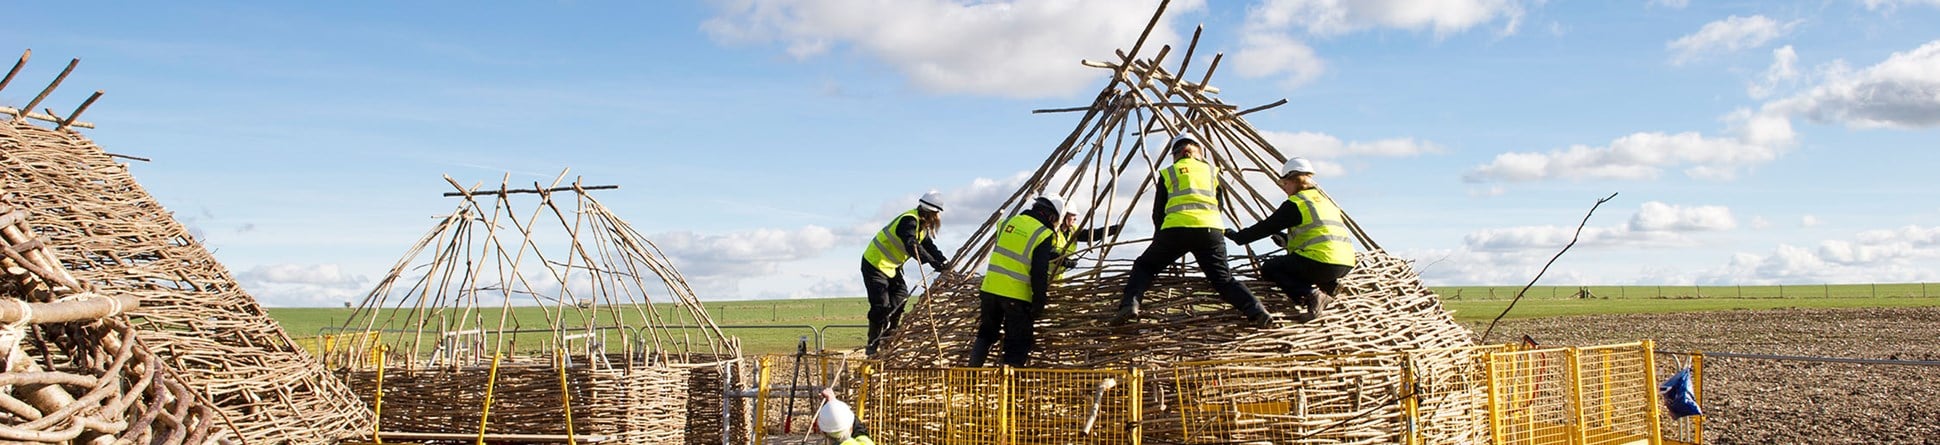 Five people in high-visibility clothing and helmets constructing a Neolithic-style hut.